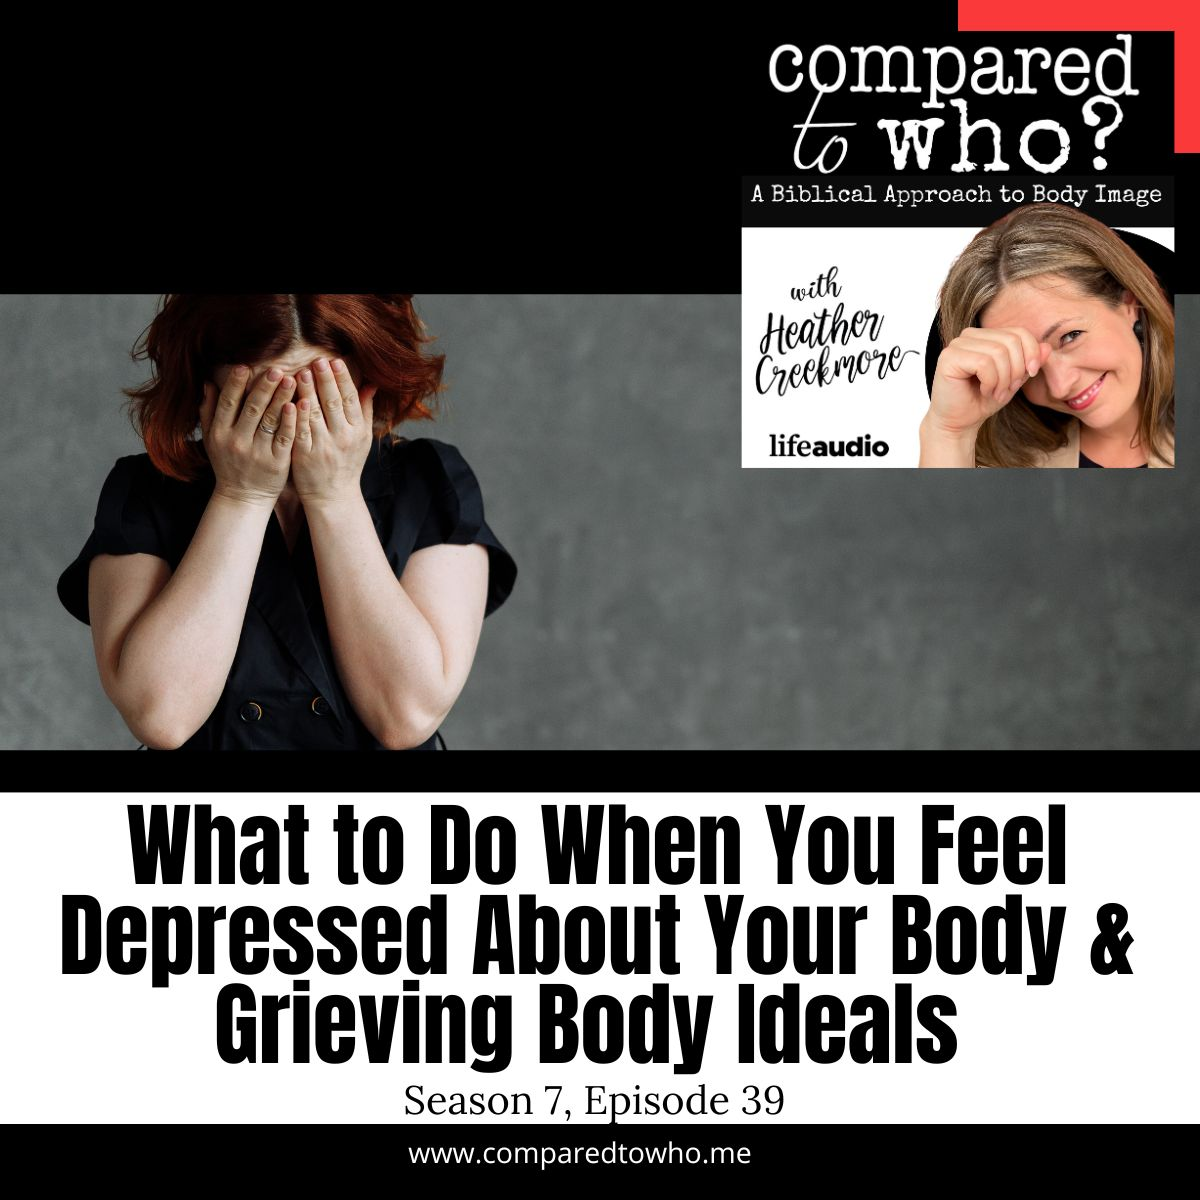 What to Do When Depressed or Grieving Over Body Size Body Image